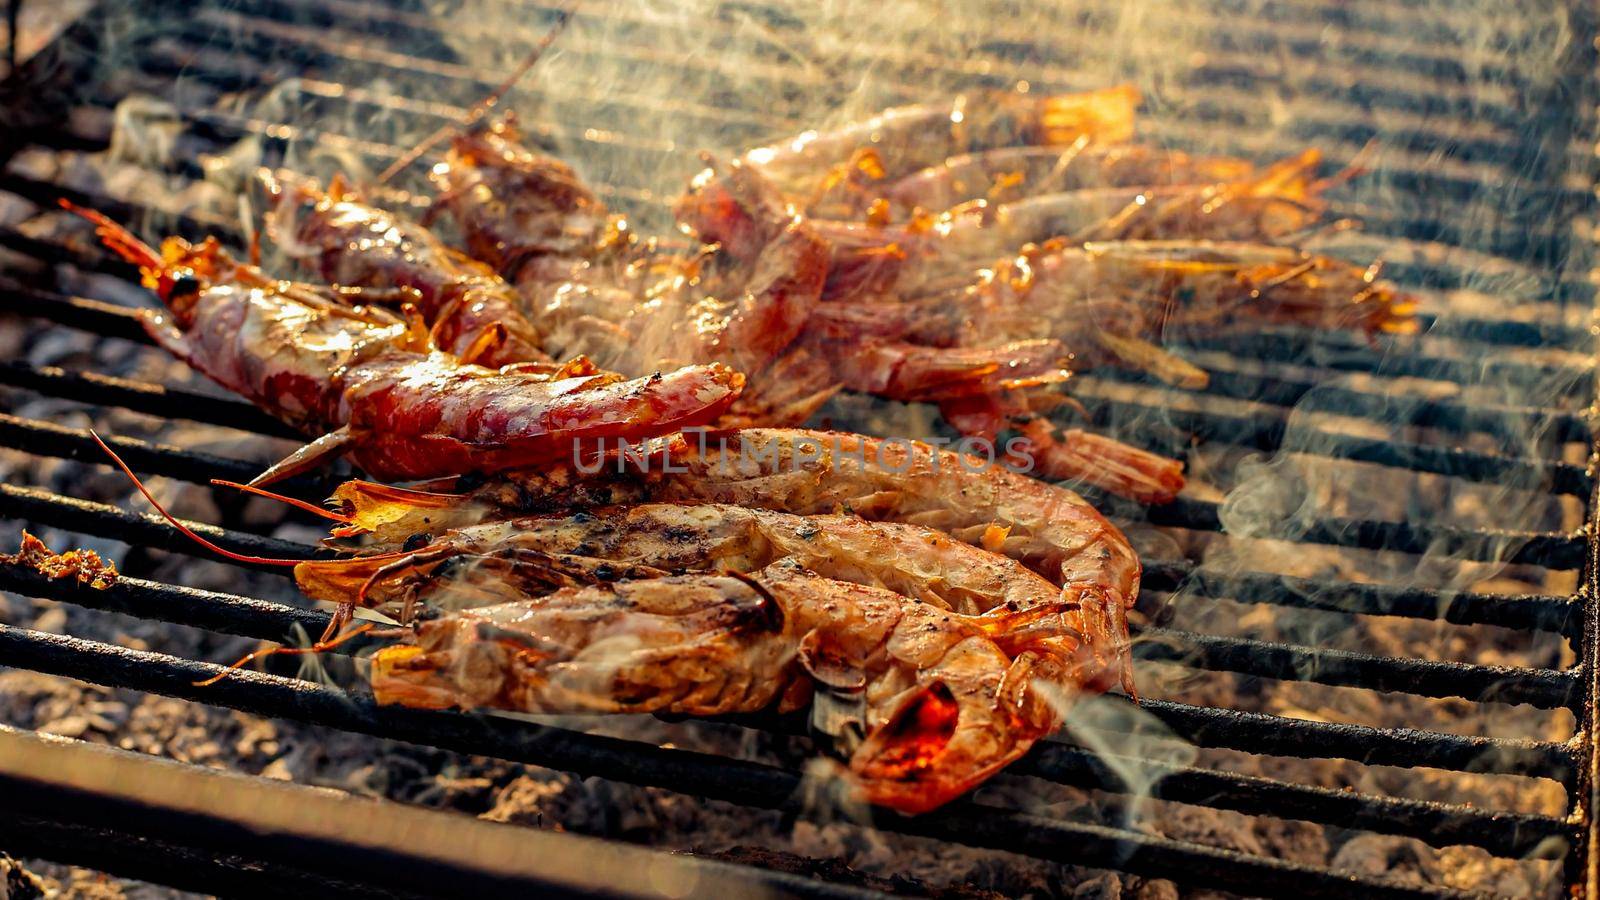 Grilled shrimp on a grill with charcoal grill by pippocarlot